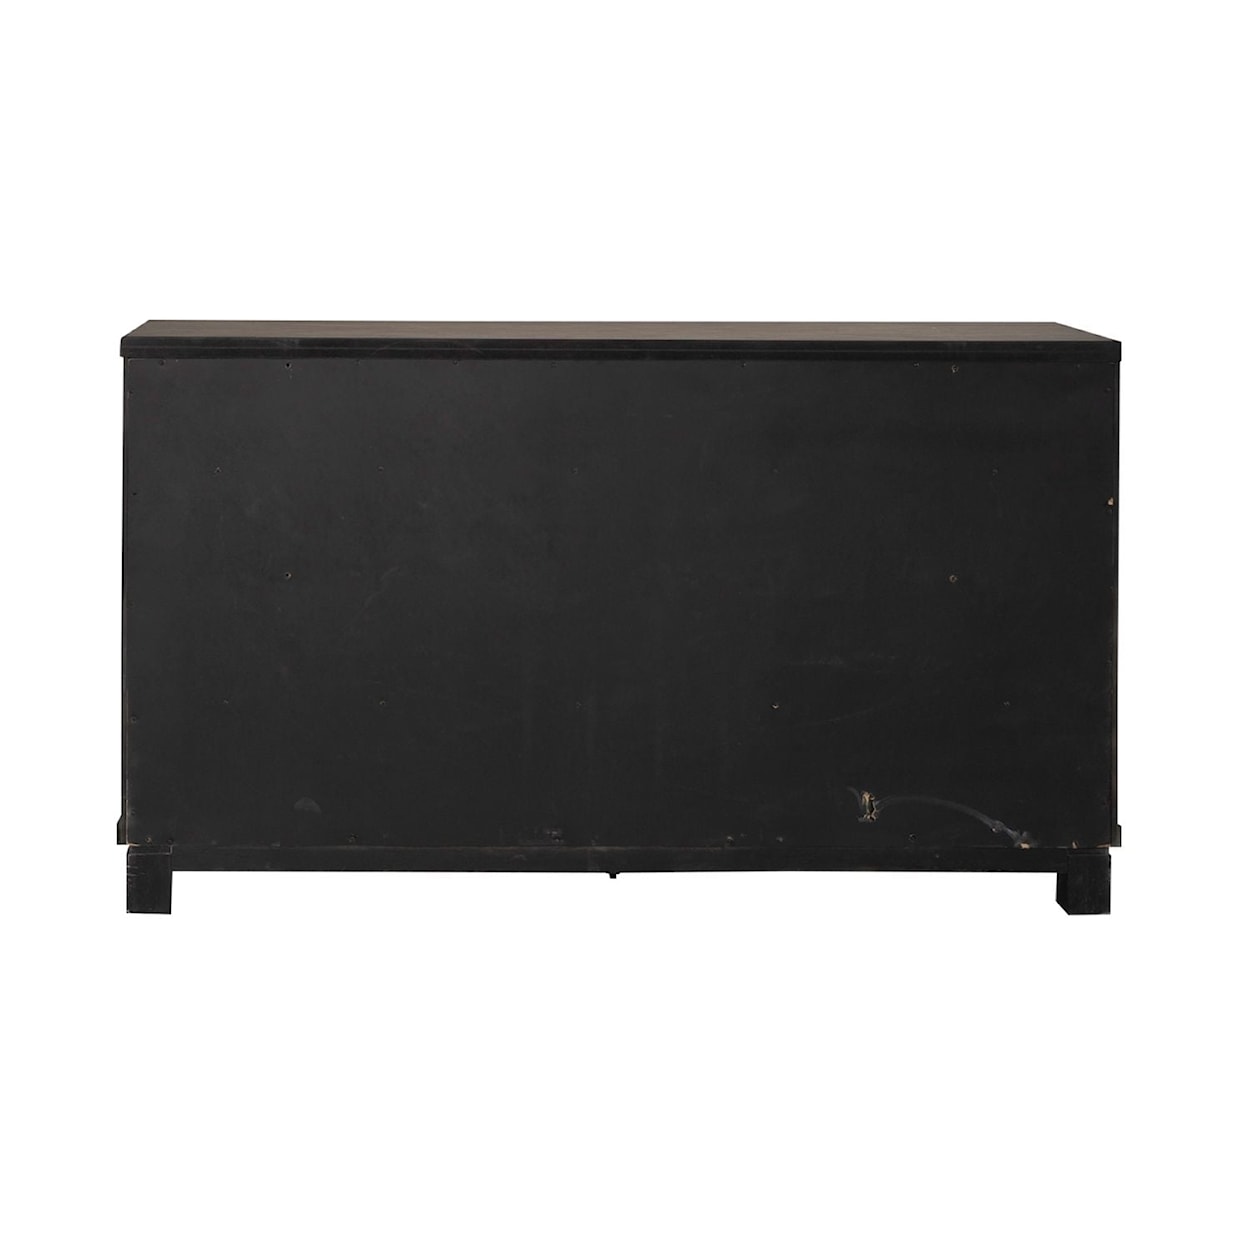 Libby Canyon Road 8-Drawer Dresser